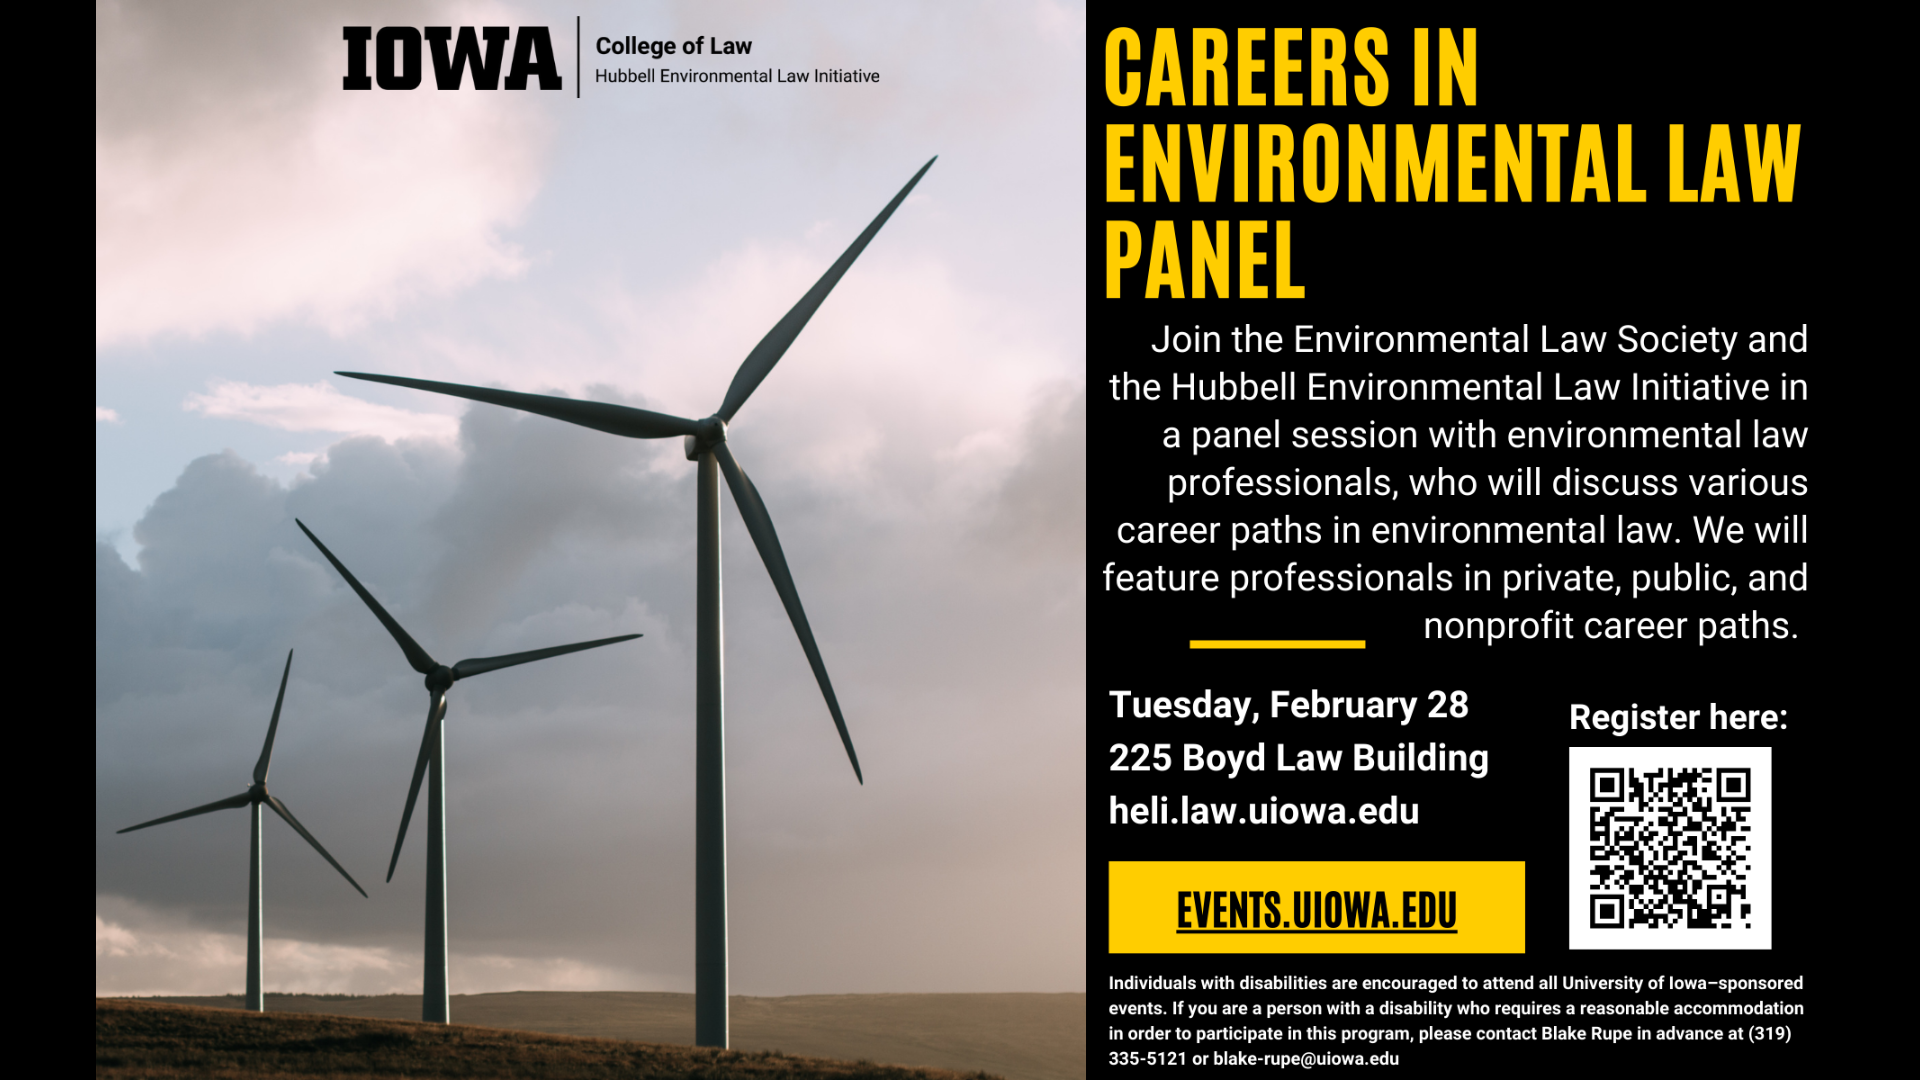 Careers in Environmental Law Panel:    Join the Environmental Law Society and the Hubbell Environmental Law Initiative in a panel session with environmental law professionals, who will discuss various career paths in environmental law. We will feature professionals in private, public, and nonprofit career paths.